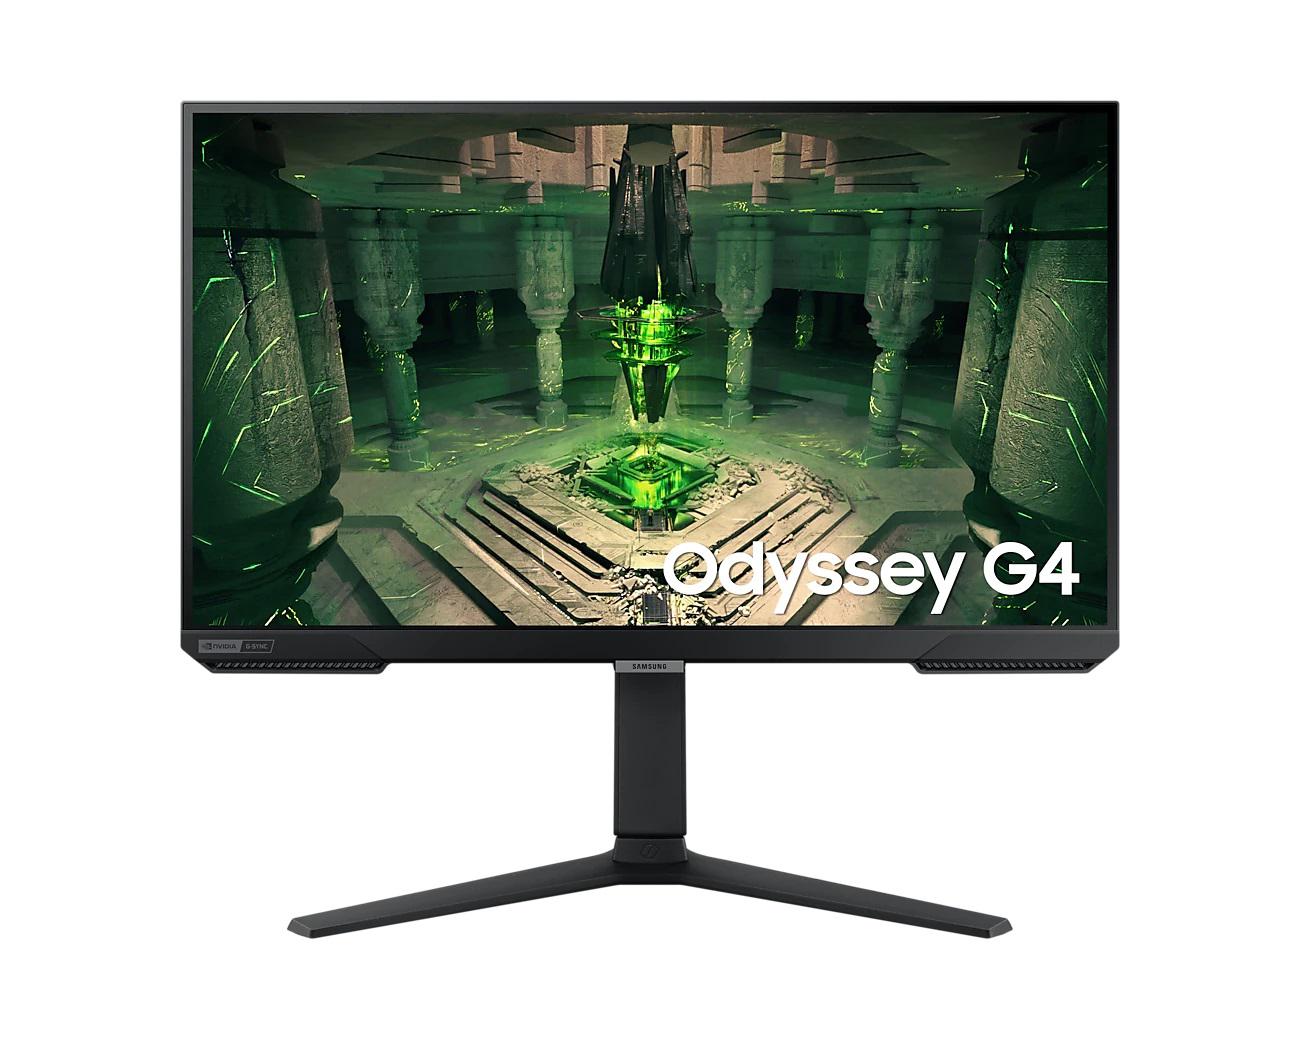 MONITOR SAMSUNG LS27BG400EUXEN 27 inch, Curvature: FLAT , Panel Type:IPS, Resolution: 1920 x 1080, Aspect Ratio: 16:9, Refresh Rate: 240Hz,Response time GtG: 1 ms, Brightness: 400 cd/m², Contrast (static): 1000: 1, Contrast (dynamic): Mega DCR, Viewing angle: 178°/178°, Color Gamut(NTSC/sRGB/Adobe